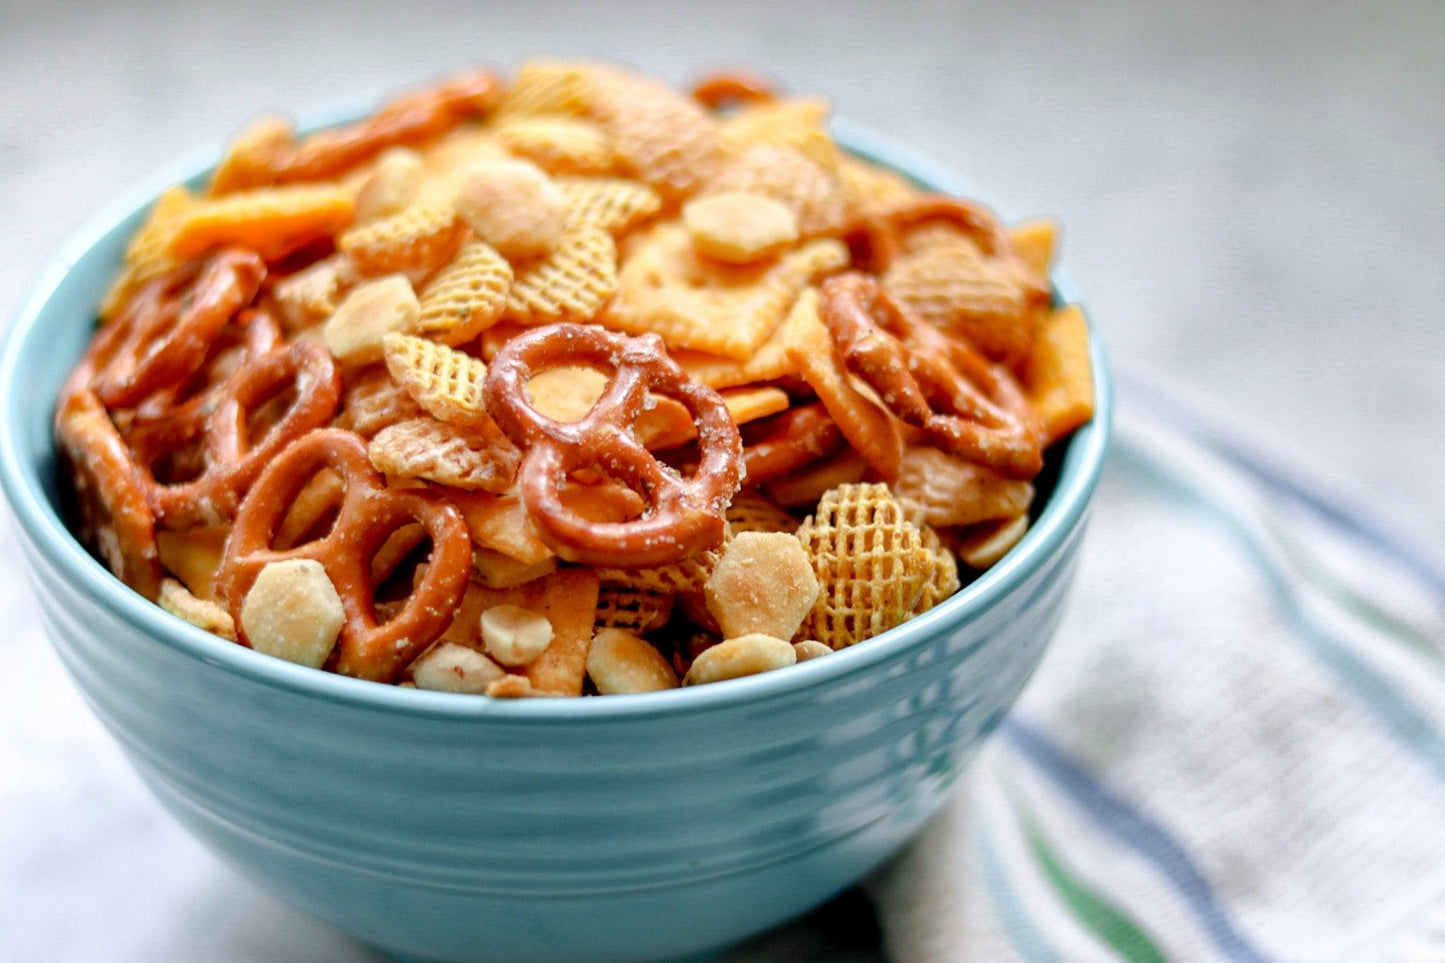 Ranch Snack MixRanch Snack Mix